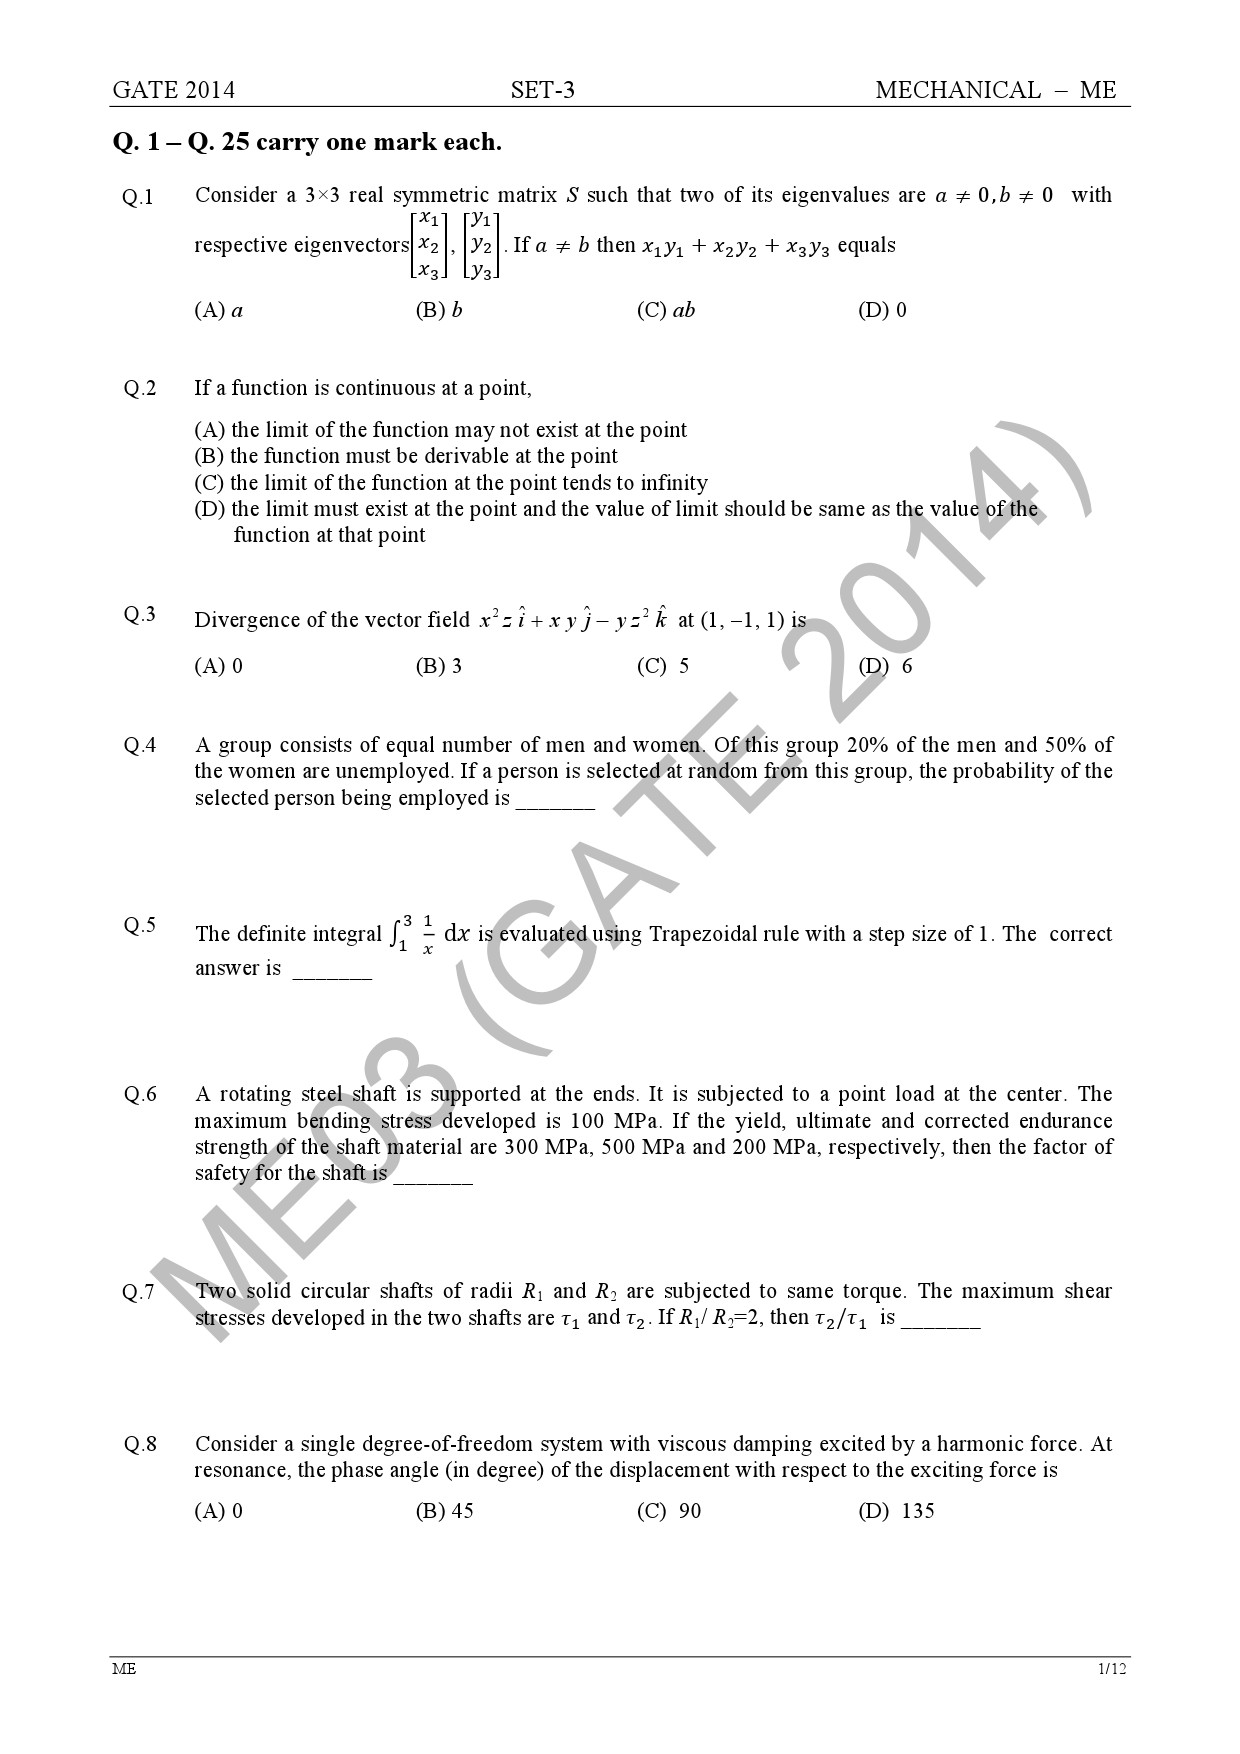 GATE Exam Question Paper 2014 Mechanical Engineering Set 3 8